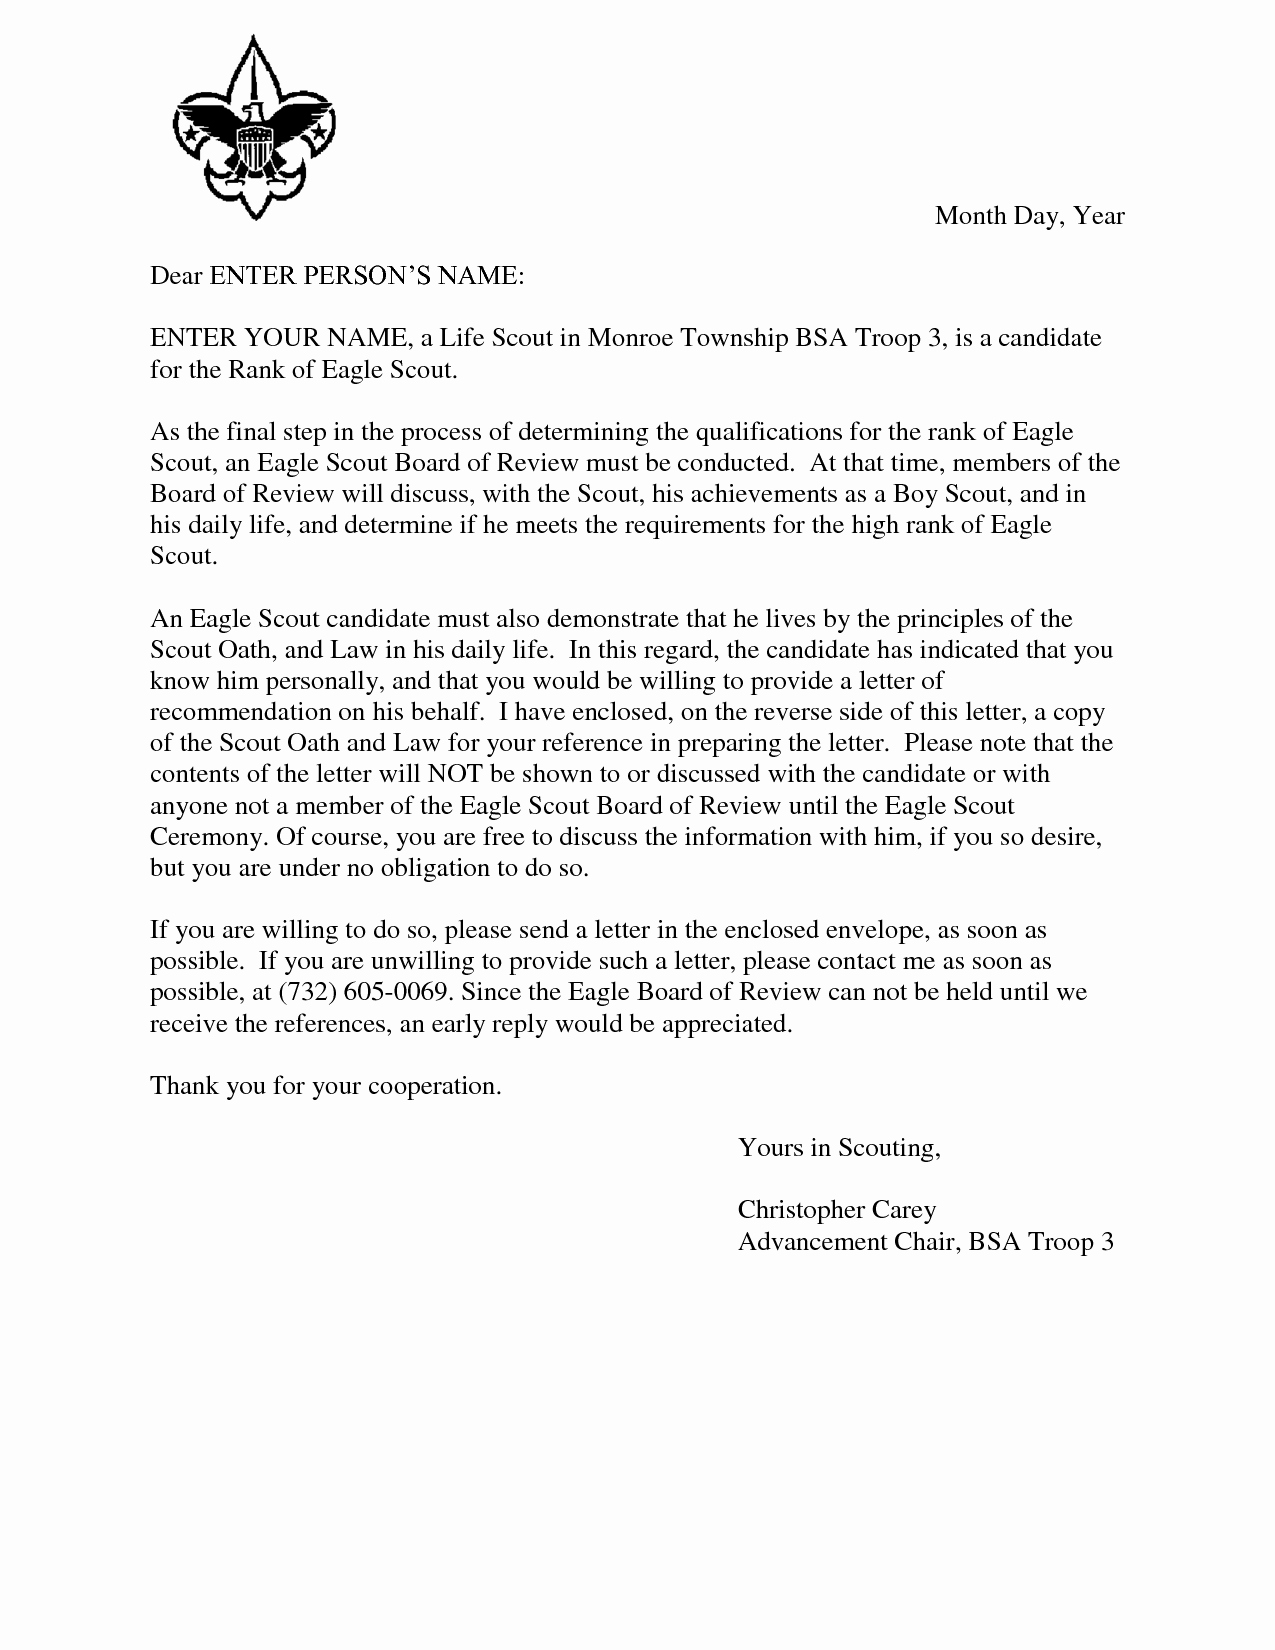 Parent Recommendation Letter for son Unique Eagle Scout Letter From Parents to Pin On